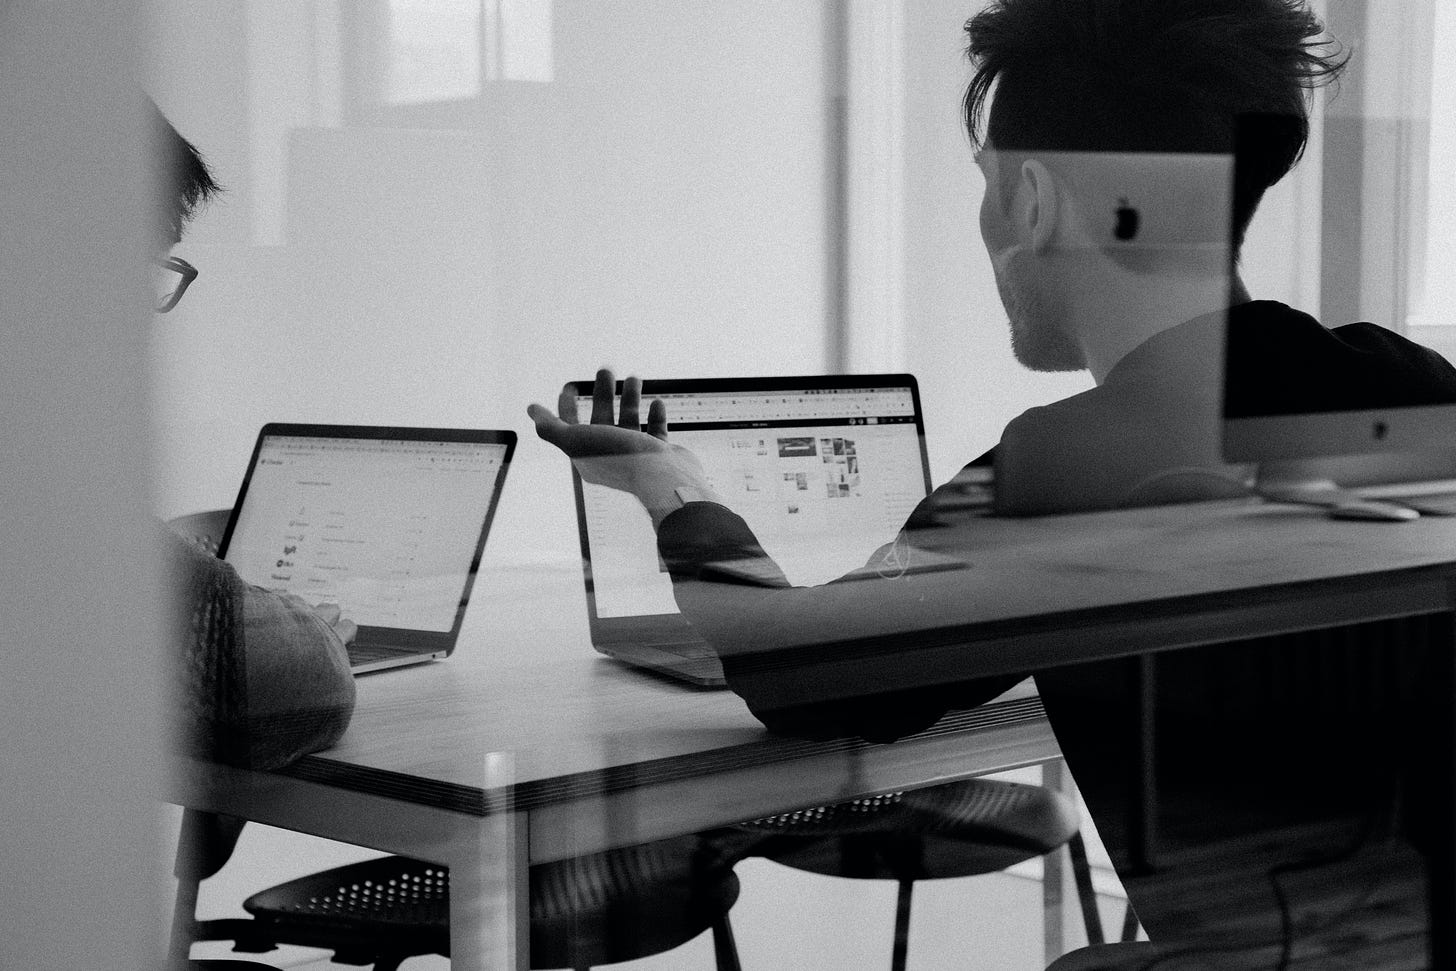 Two people discussing over their computers at a desk